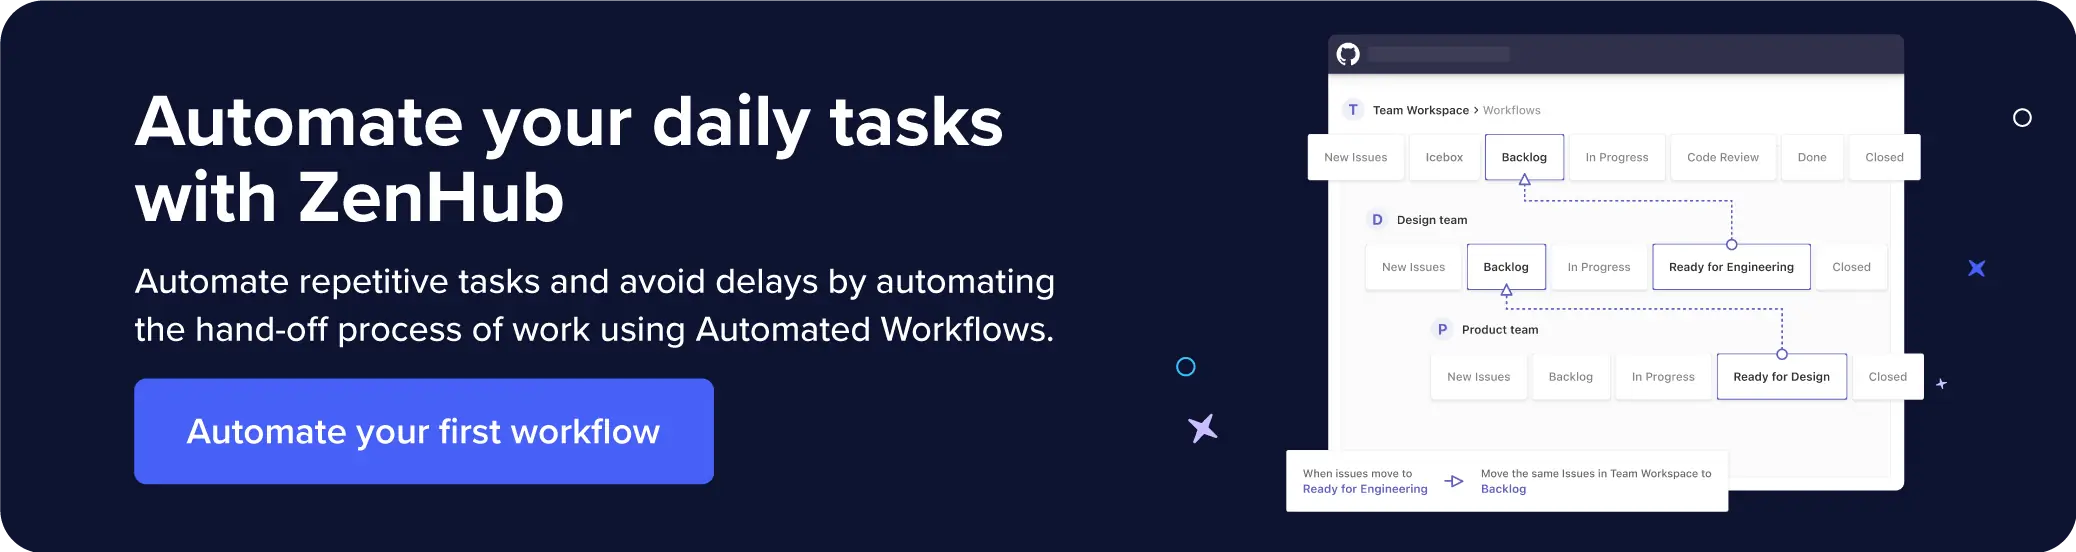 Suggests tracking and filtering tasks, prioritizing Issues, and combining multiple Repositories into a single workspace.